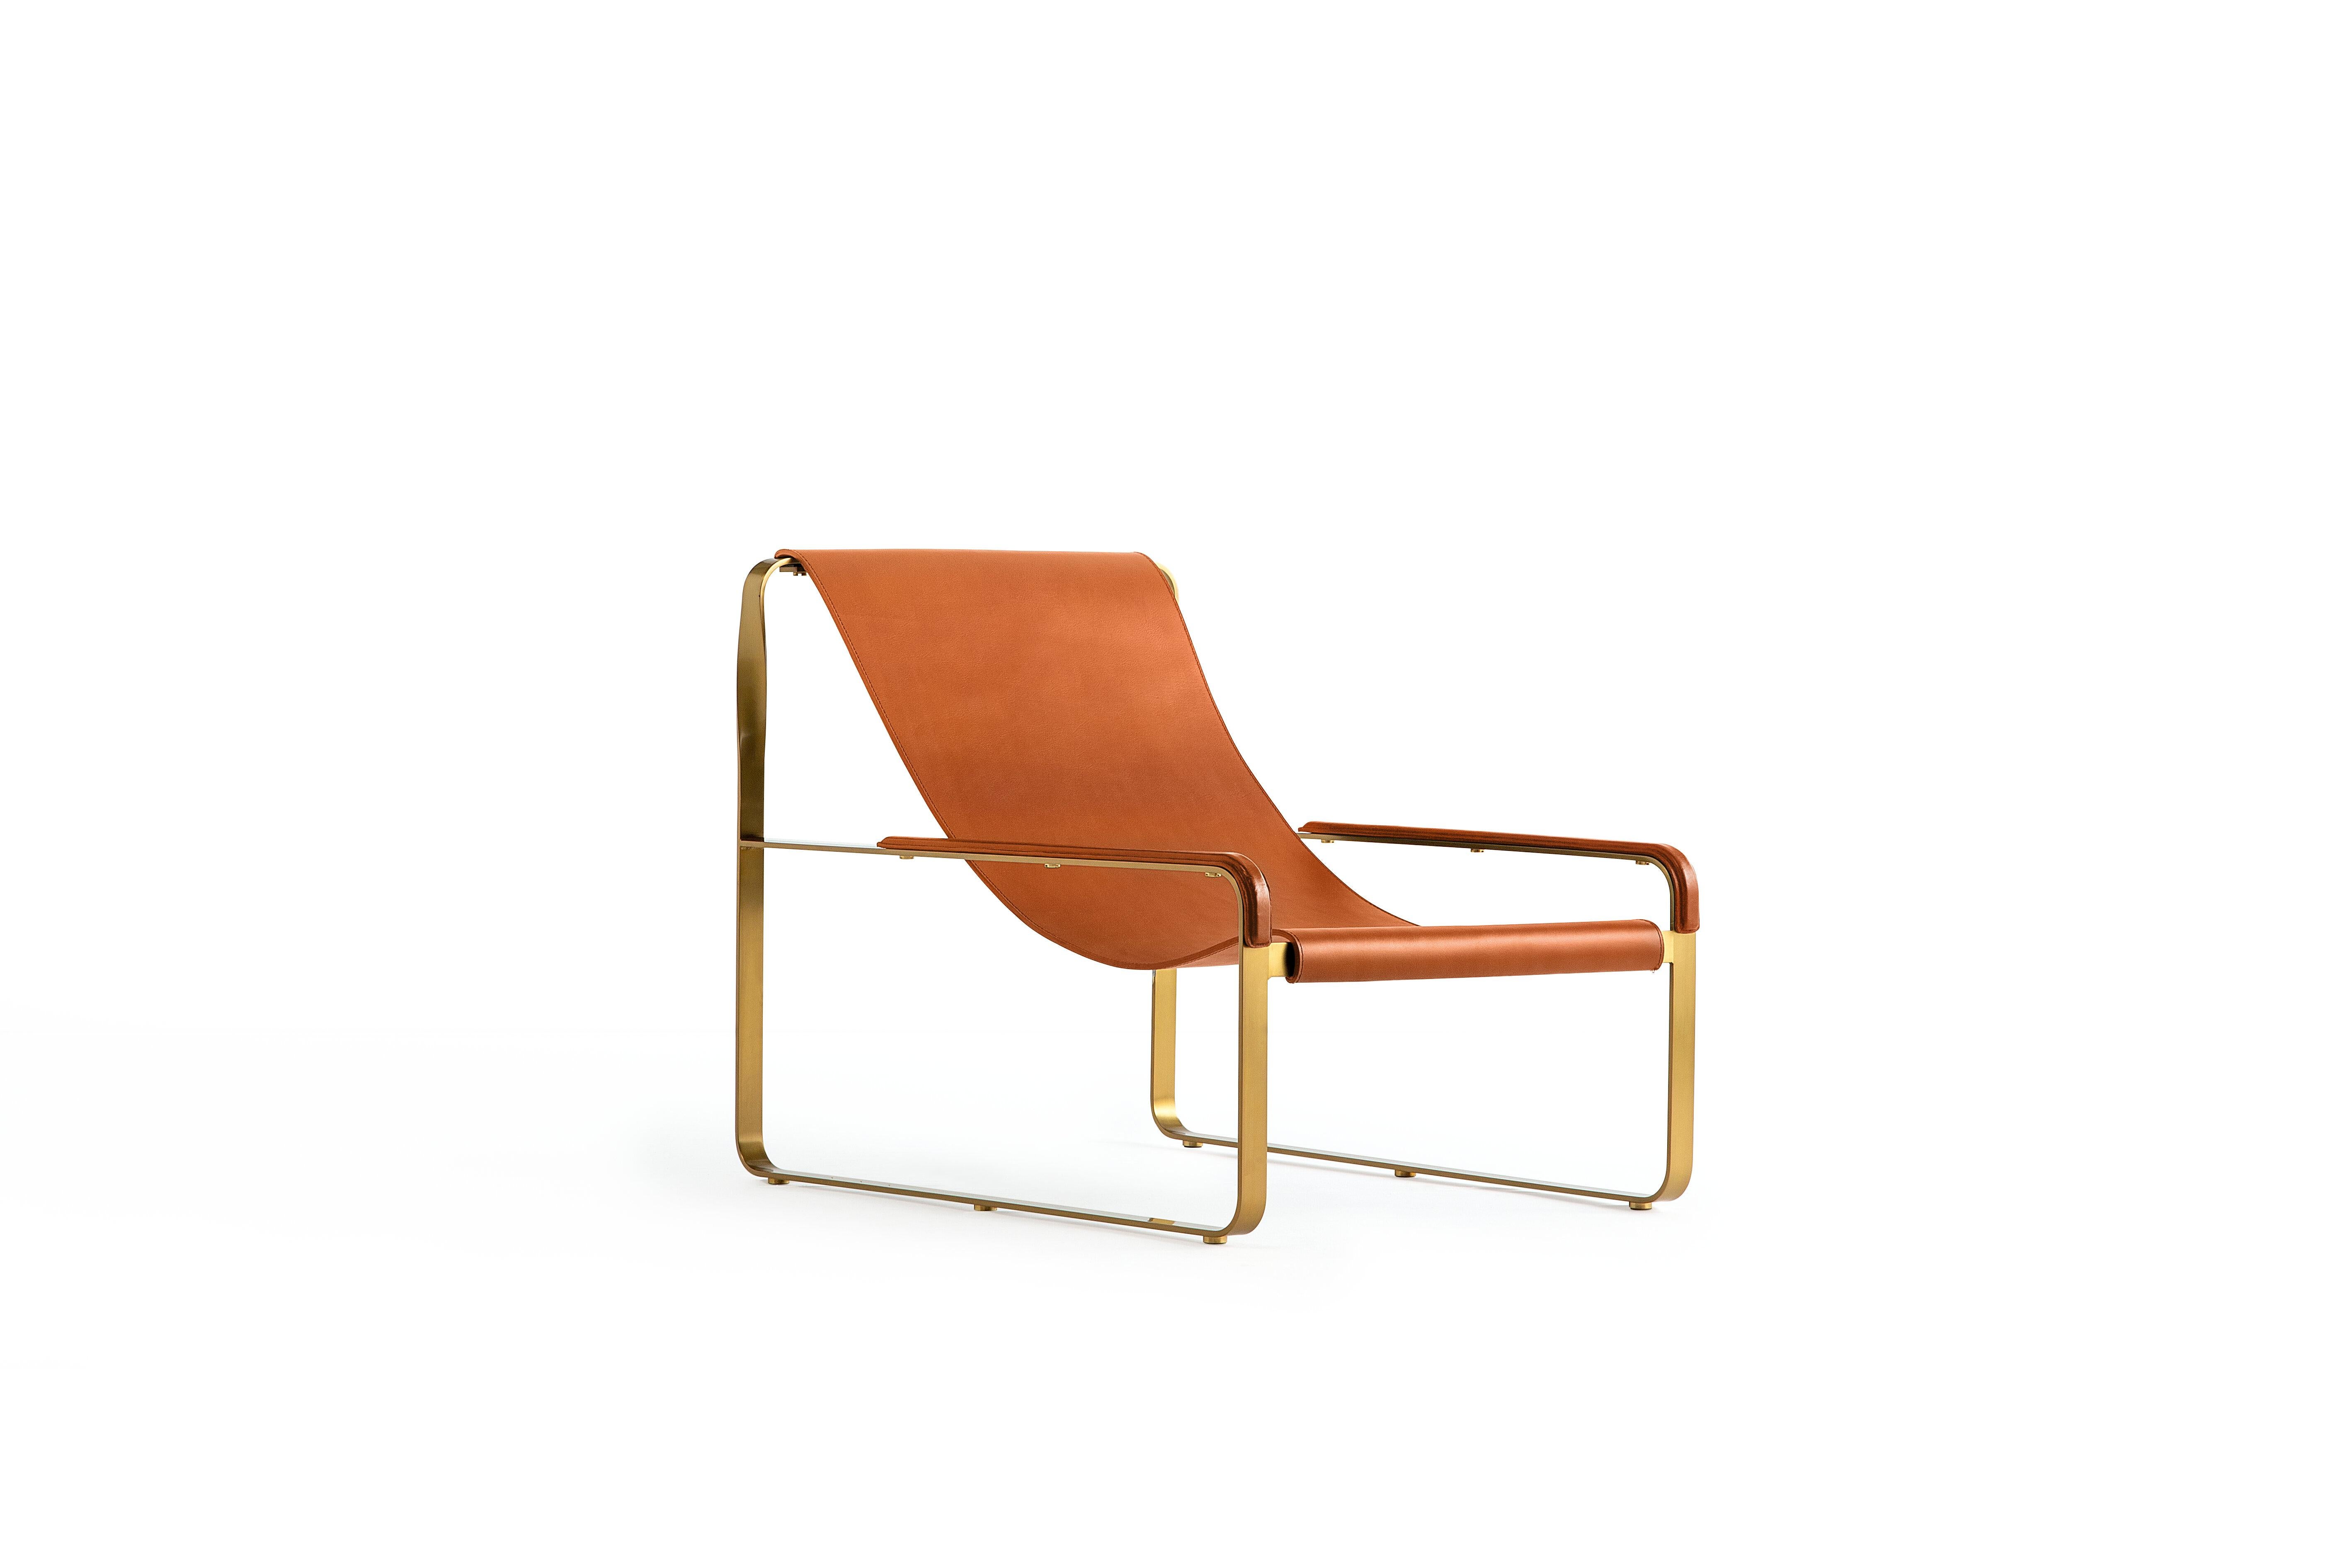 Modern style wanderlust collection chaise lounge aged brass steel and natural tobacco leather

Serene pieces where exclusivity and precision are shown in small details such as the hand-turned metal nuts and bolts that fix the leather surfaces, that